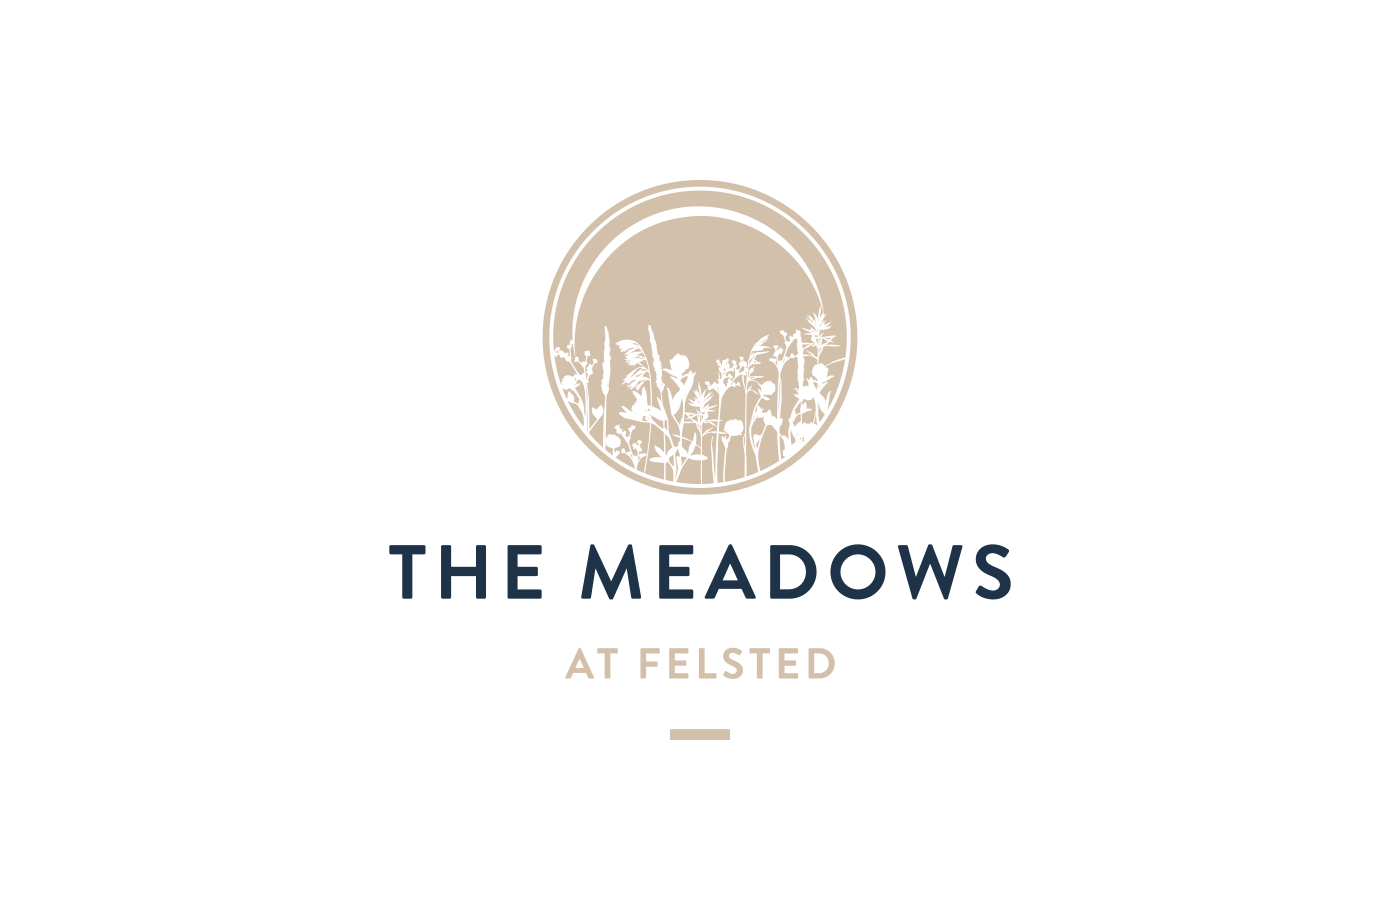 The Meadows at Felsted